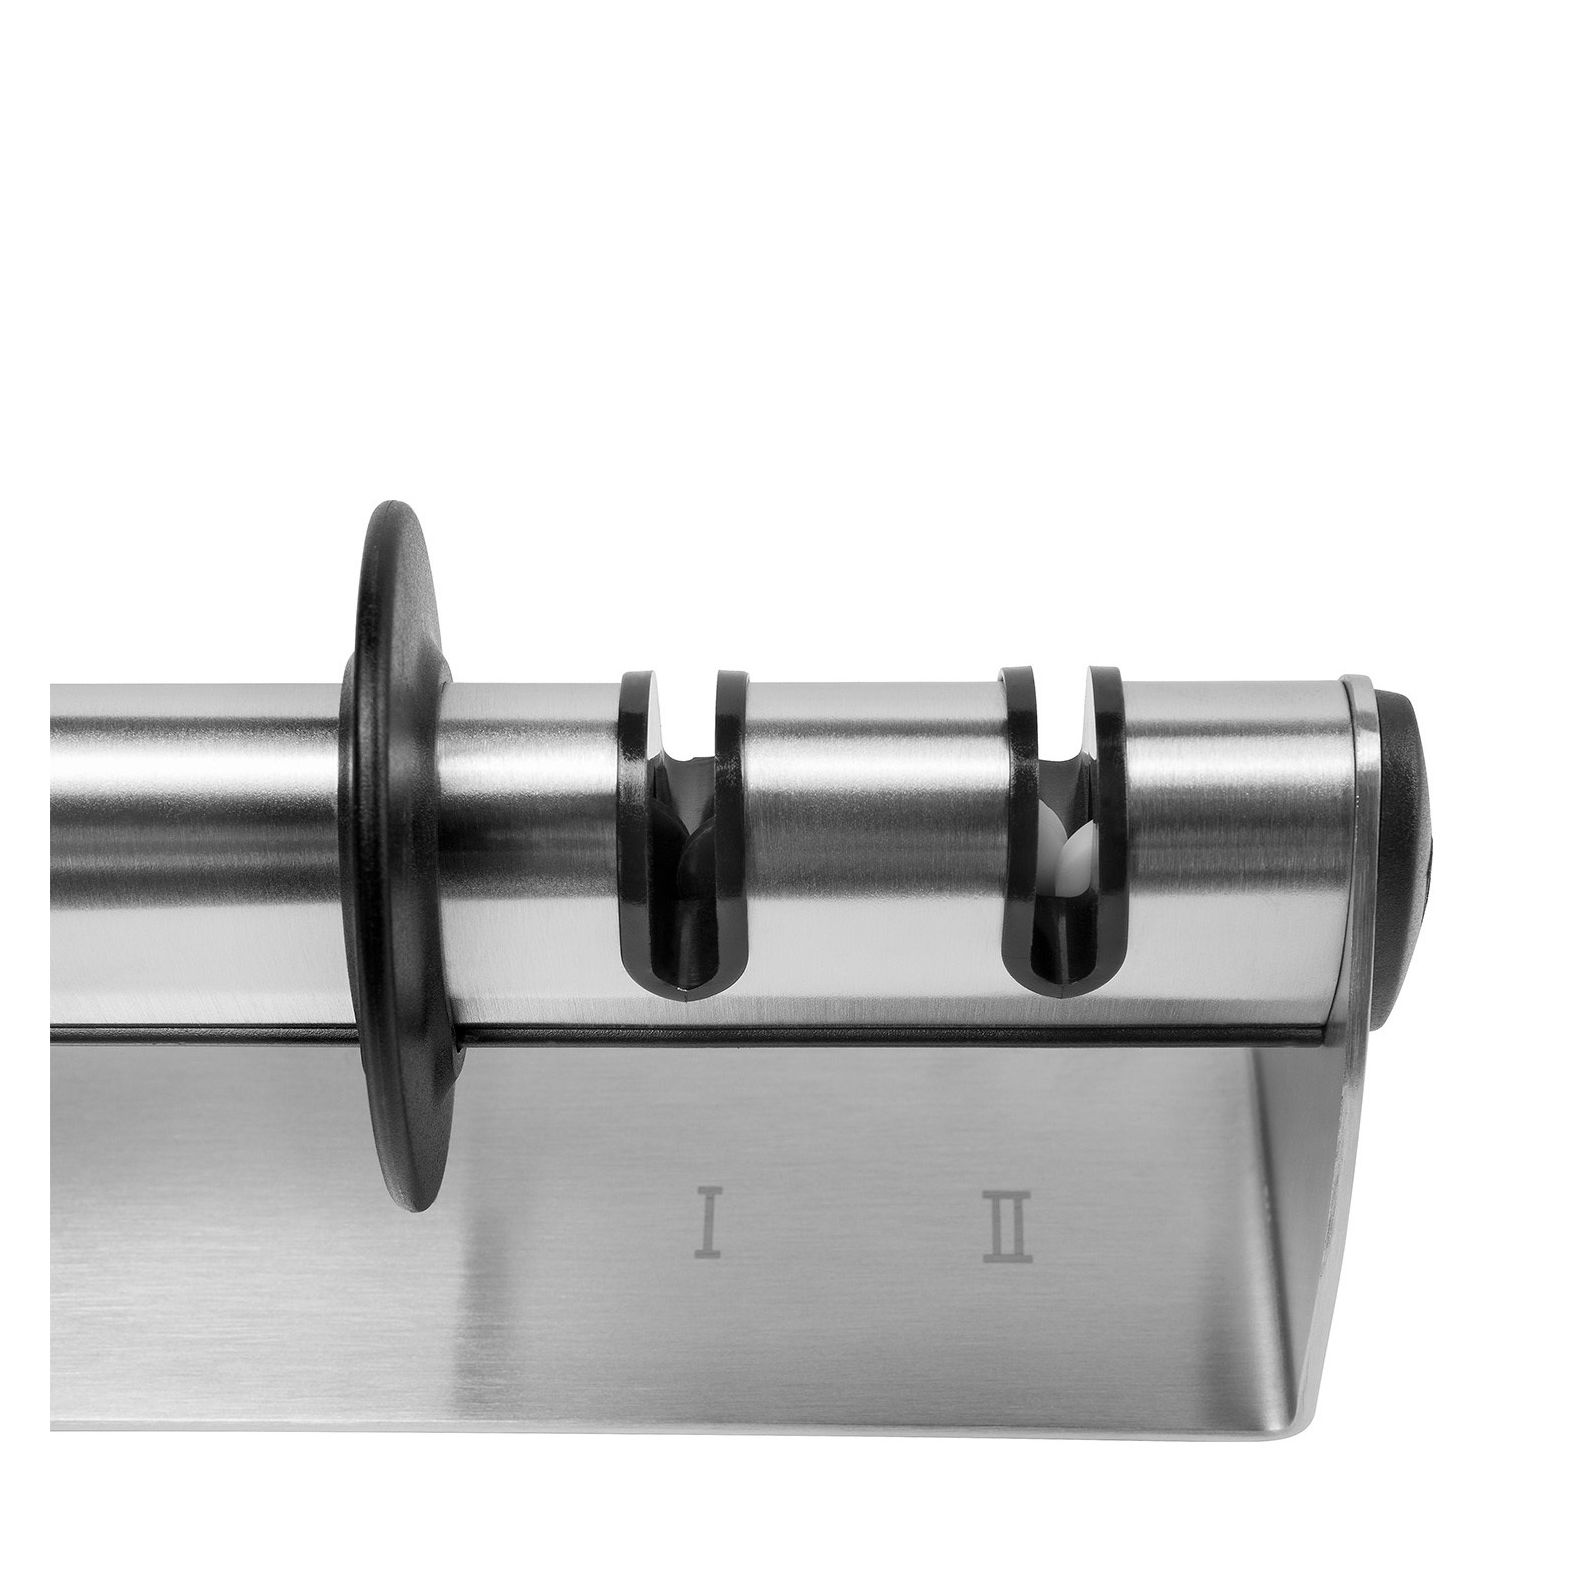 Zwilling J.A. Henckels 2-Stage Pull-Through Knife Sharpener - KnifeCenter -  32603-301 - Discontinued